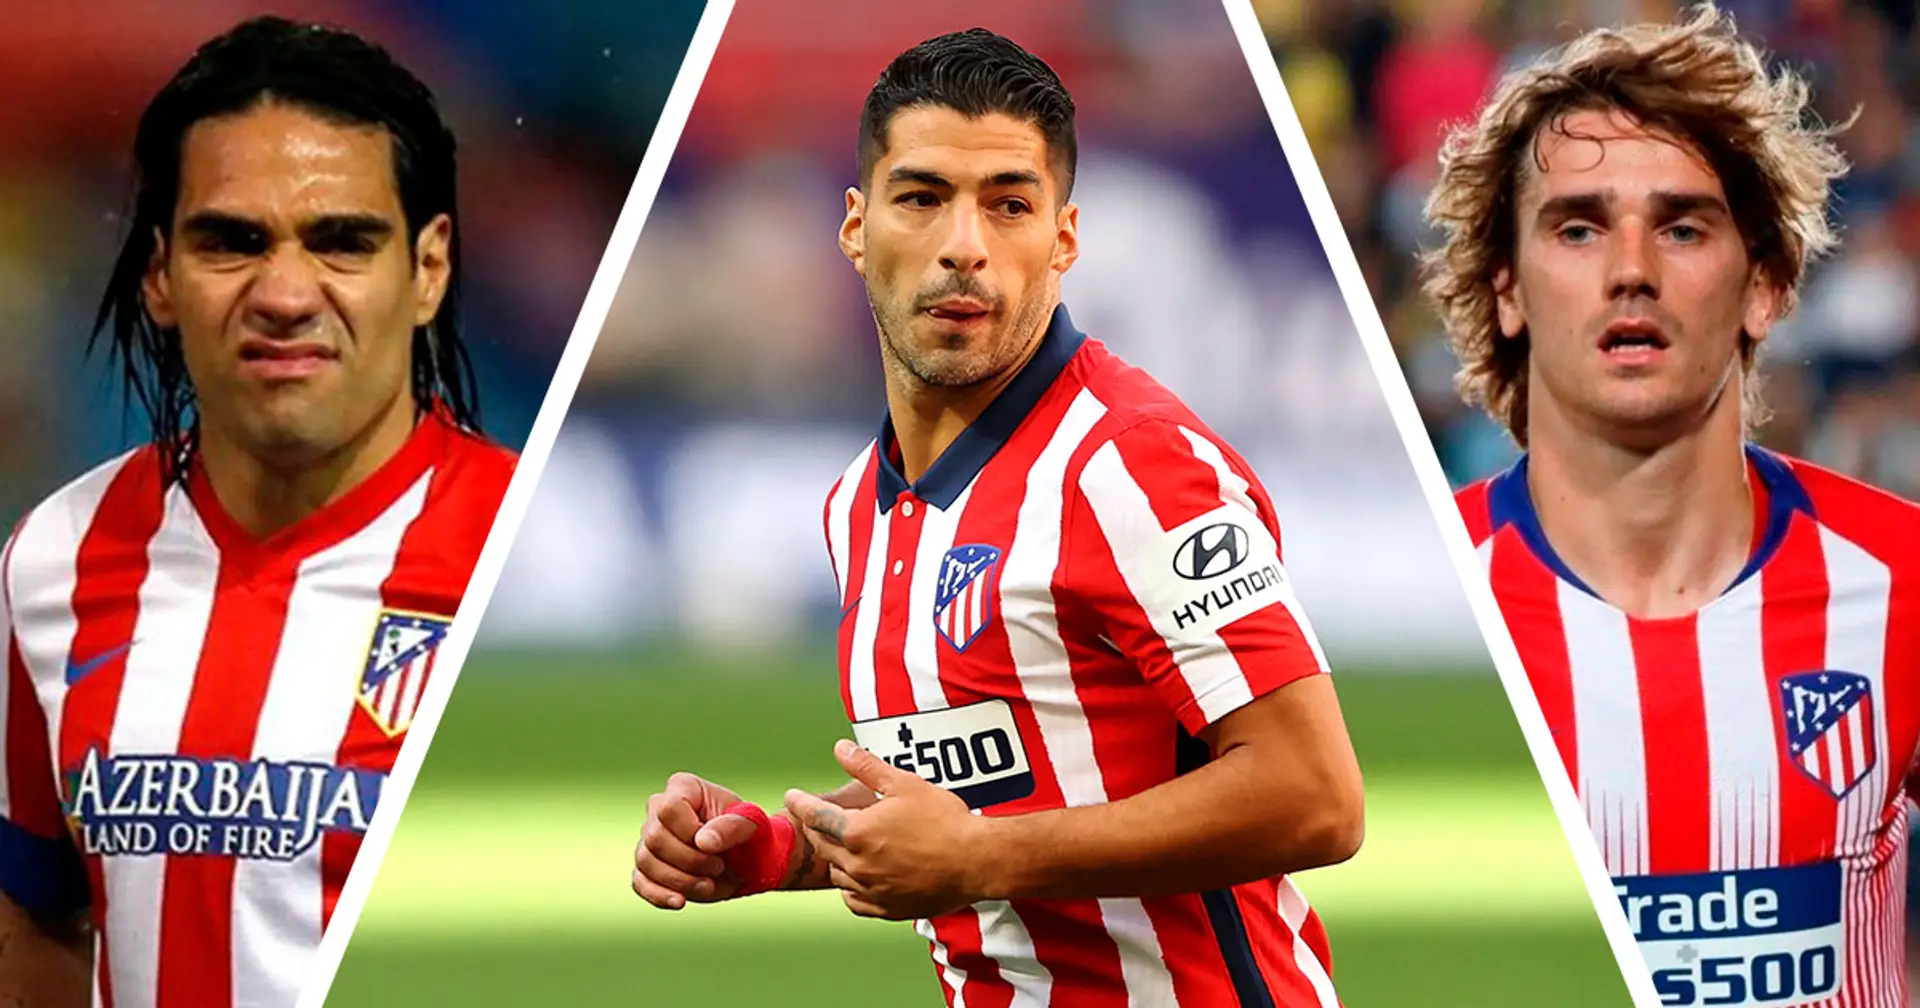 Suarez off to flying start with Atletico – something Falcao, Forlan and even Griezmann couldn't boast about